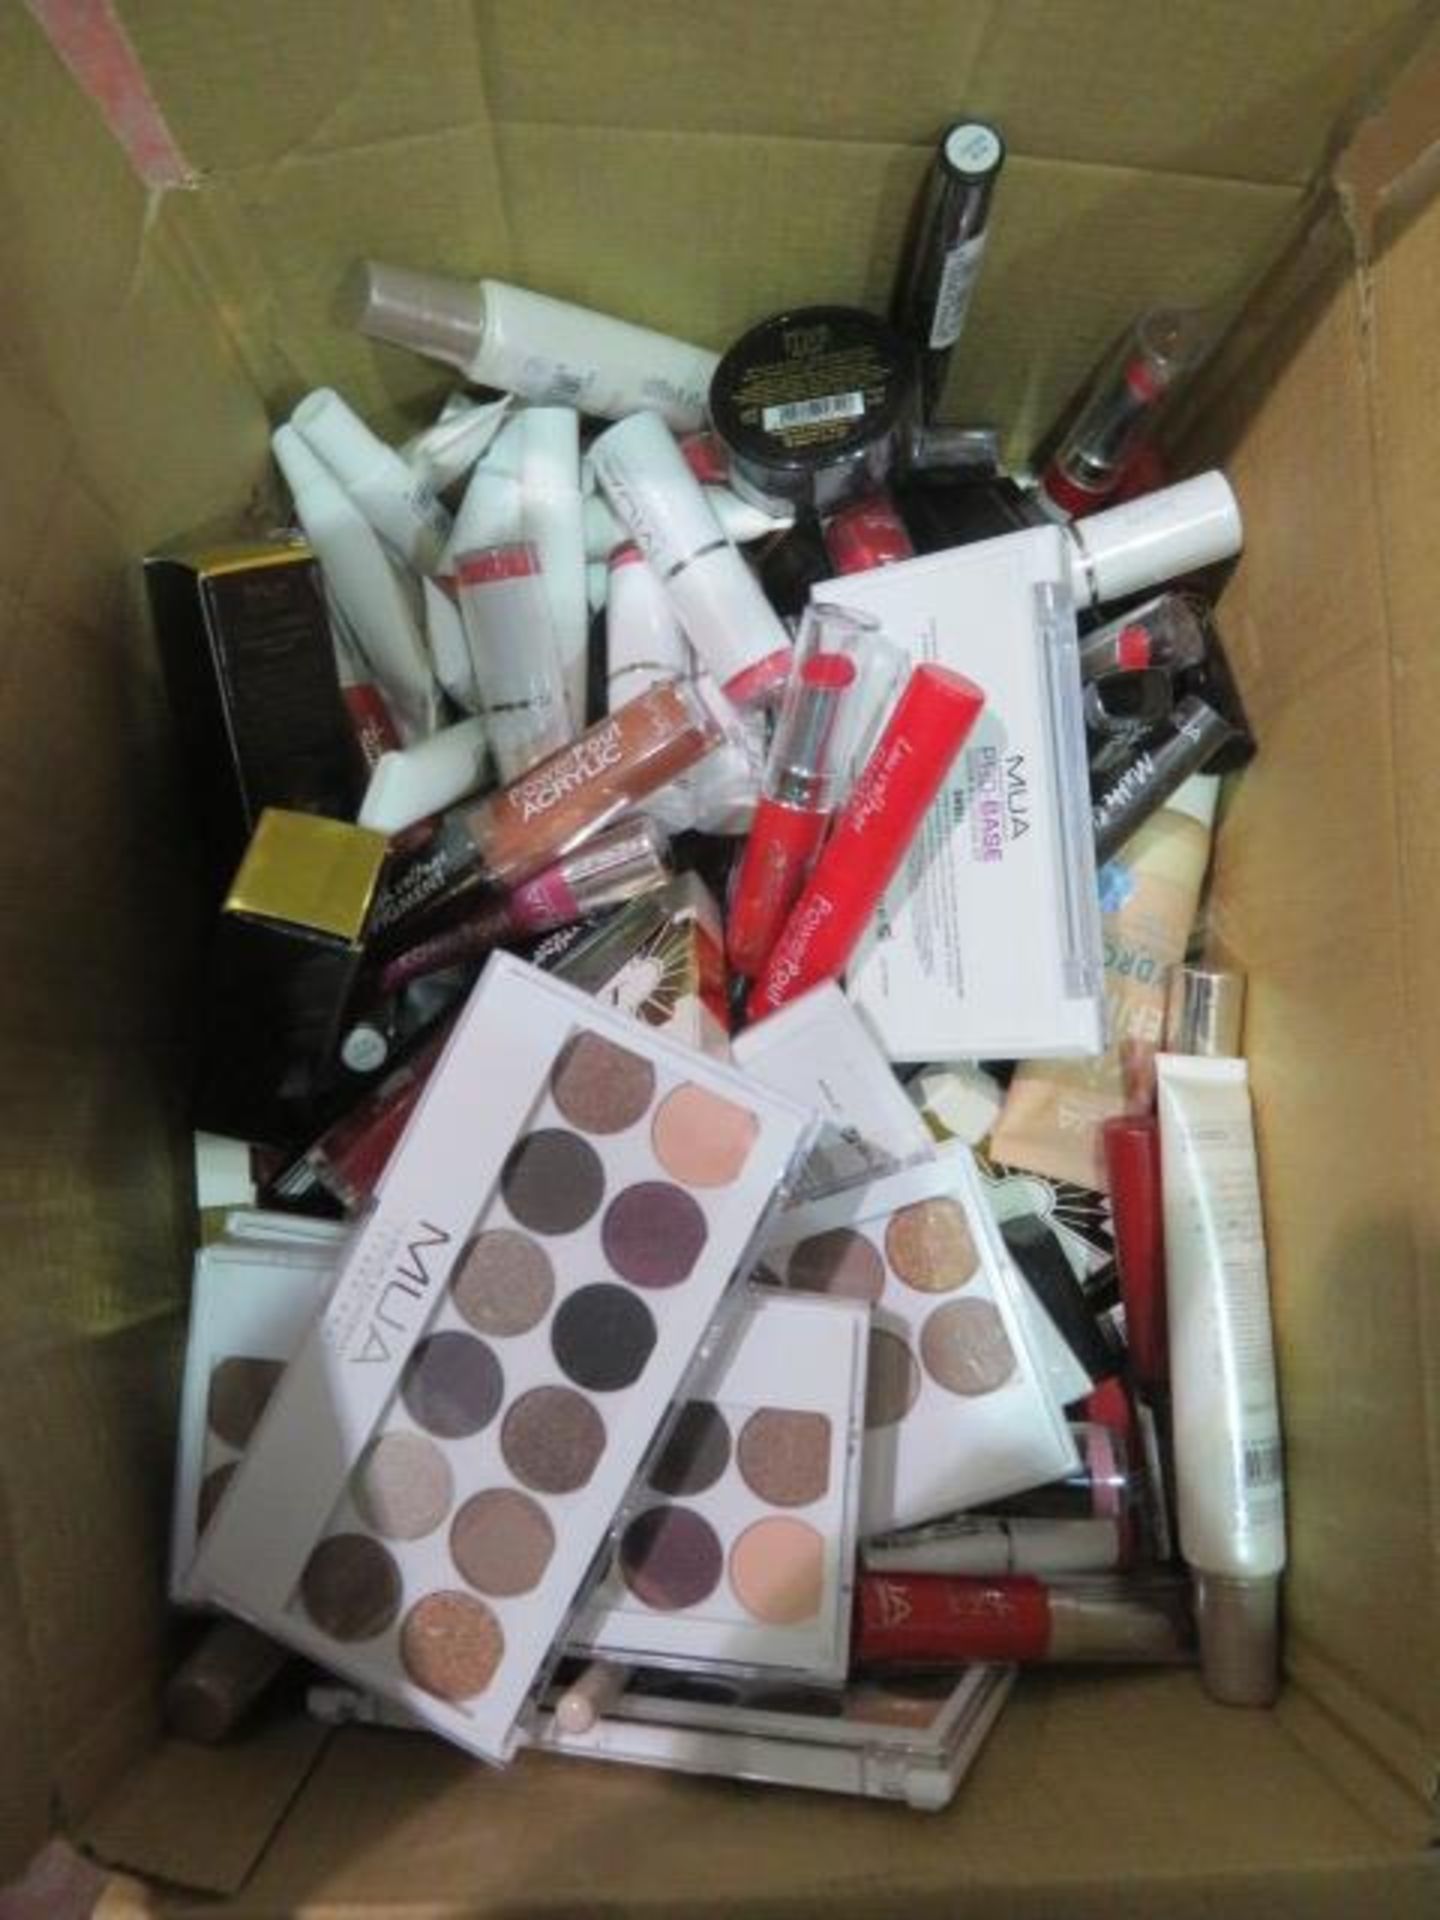 (Z65) Circa. 200 items of various new make up acadamy make up to include: skin define hydro fou... - Image 2 of 2